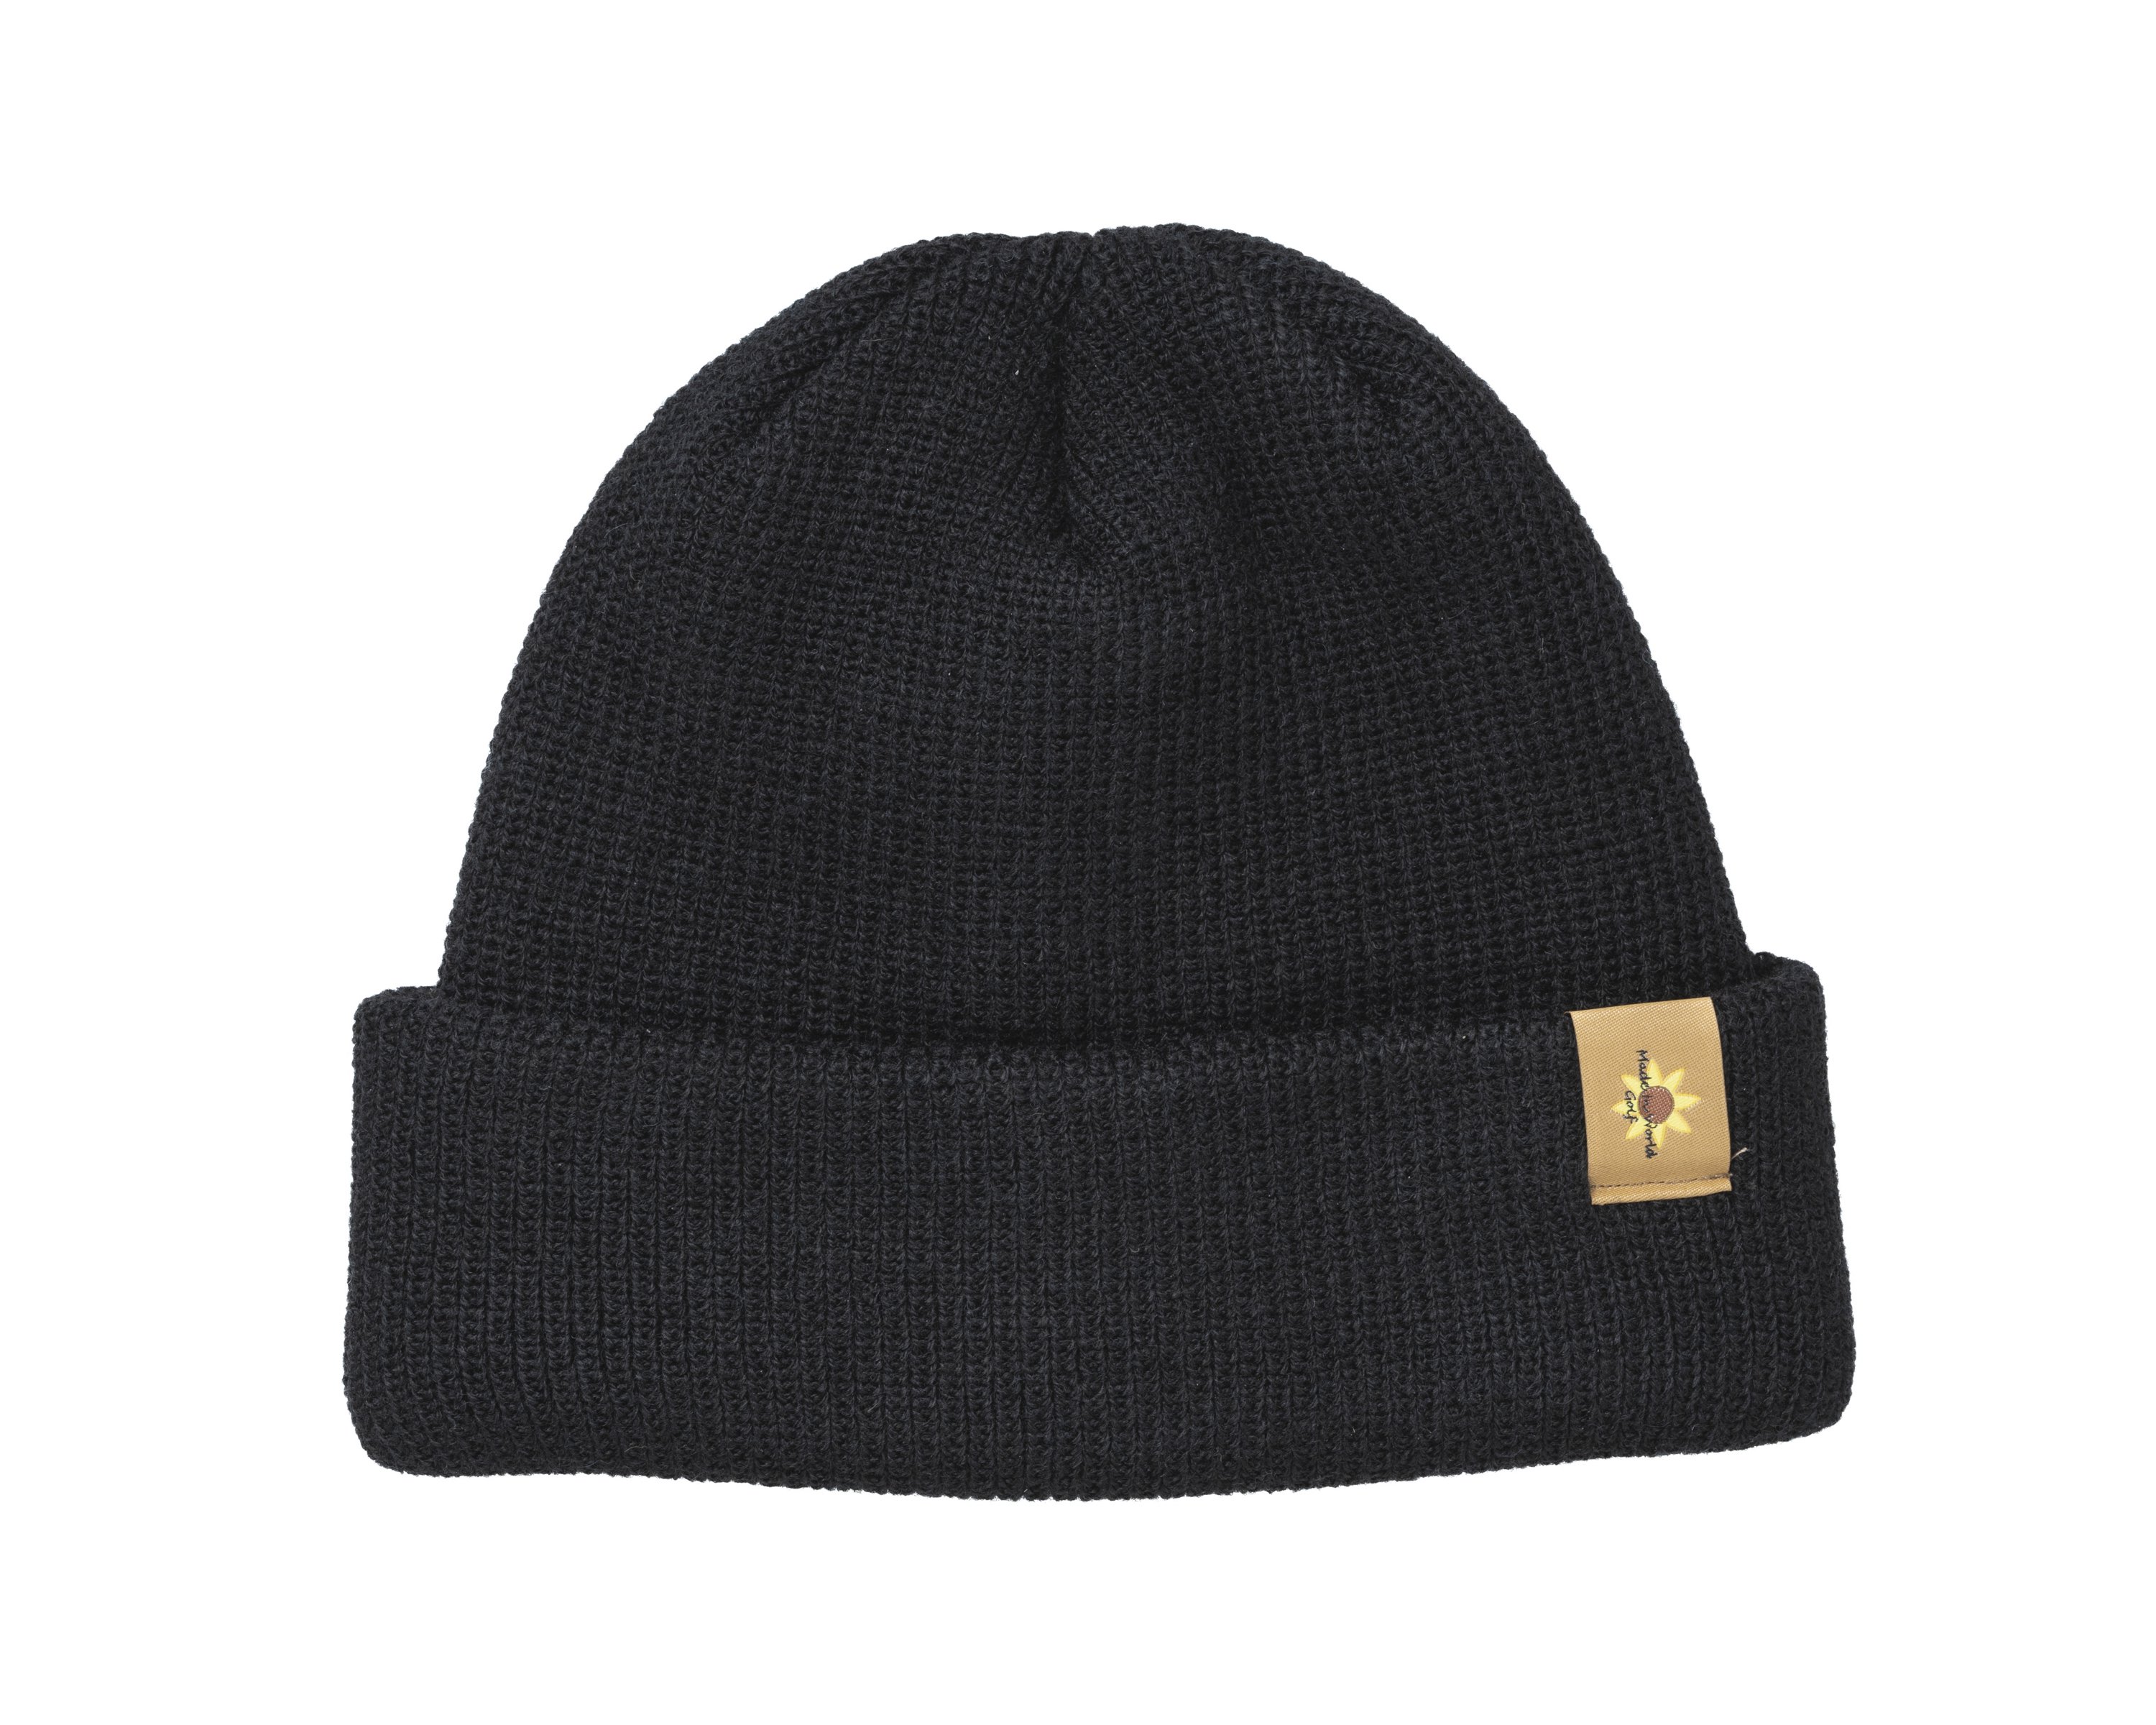 <img class='new_mark_img1' src='https://img.shop-pro.jp/img/new/icons14.gif' style='border:none;display:inline;margin:0px;padding:0px;width:auto;' />KNIT CAP<br />black